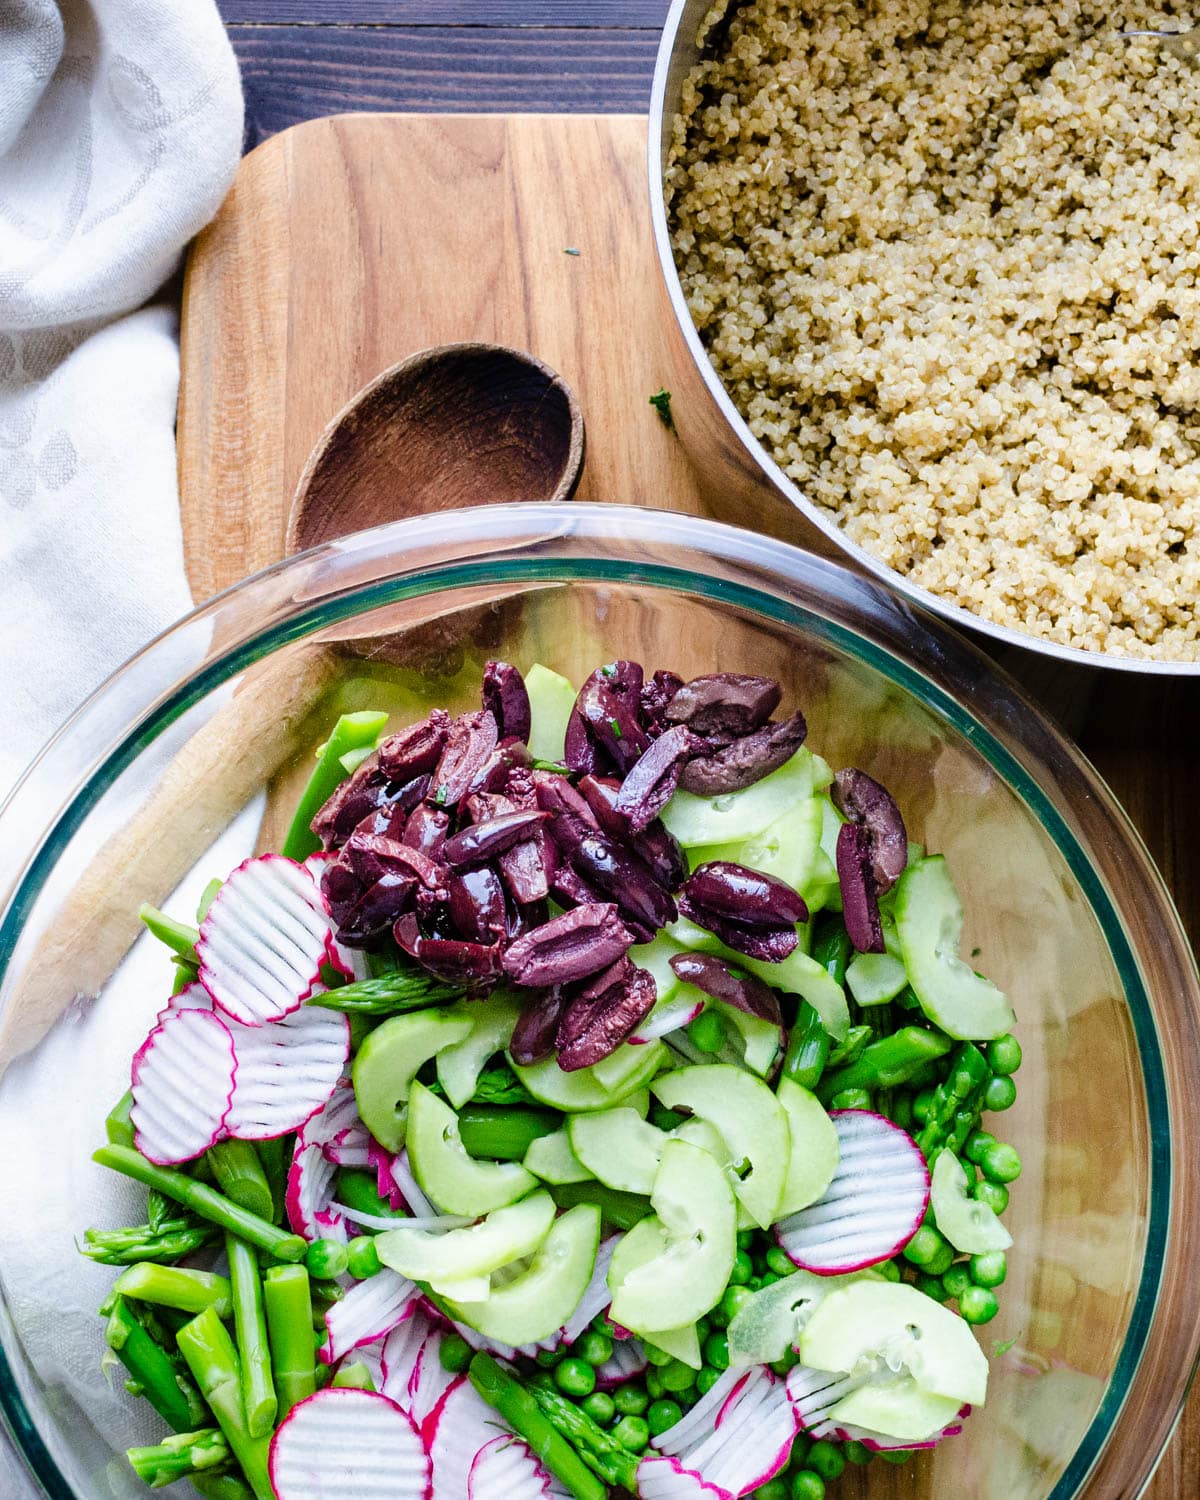 Assemble the vegetables in a large bowl before adding cooled quinoa.